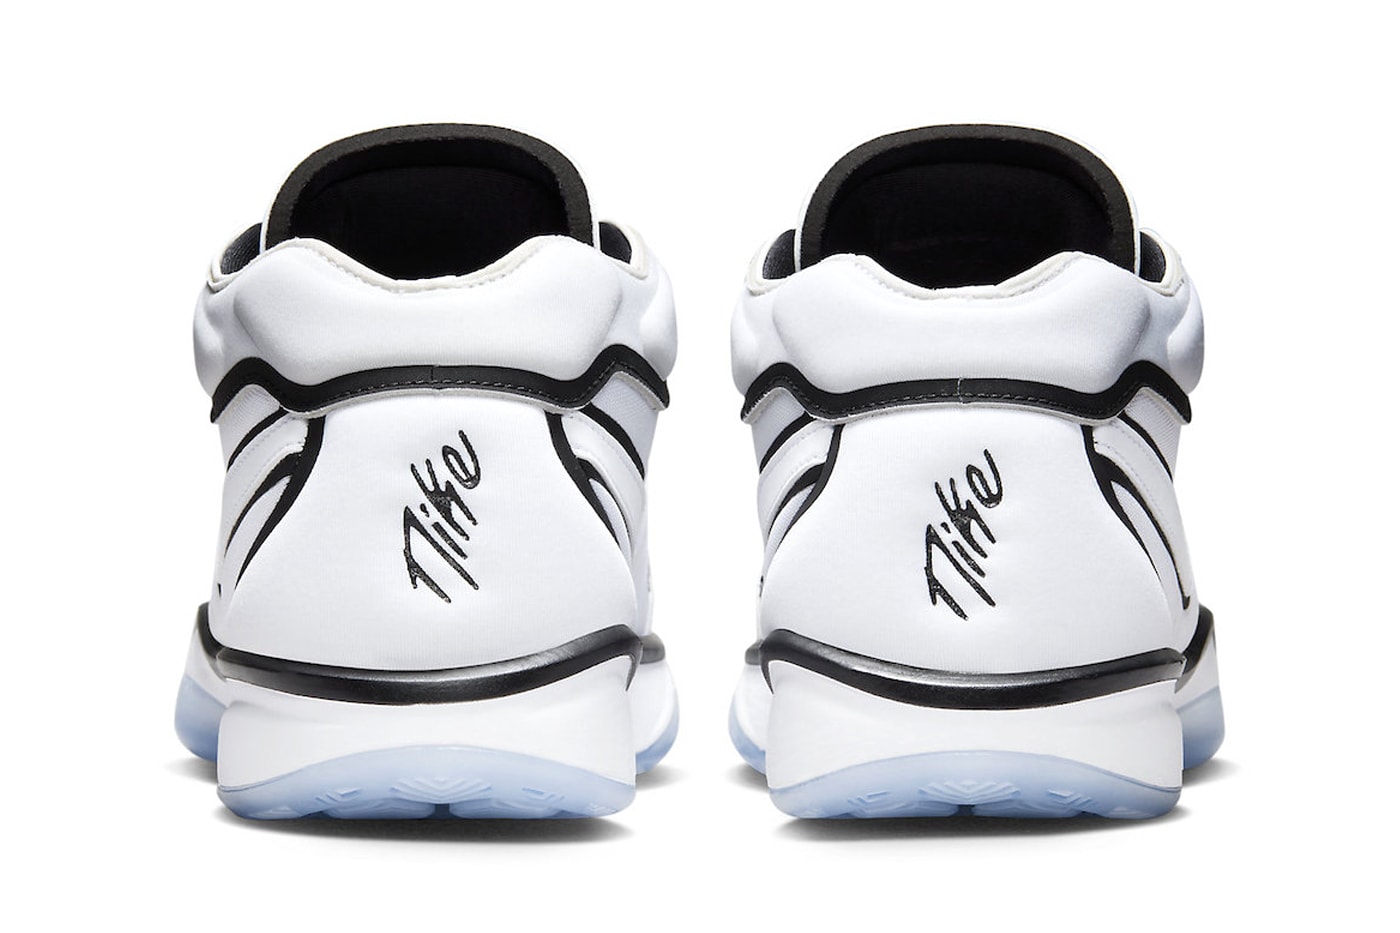 Nike Air Zoom GT Hustle 2 Surfaces in "White/Black" DJ9405-102 Release info regular everyday shoes swoosh court shoes